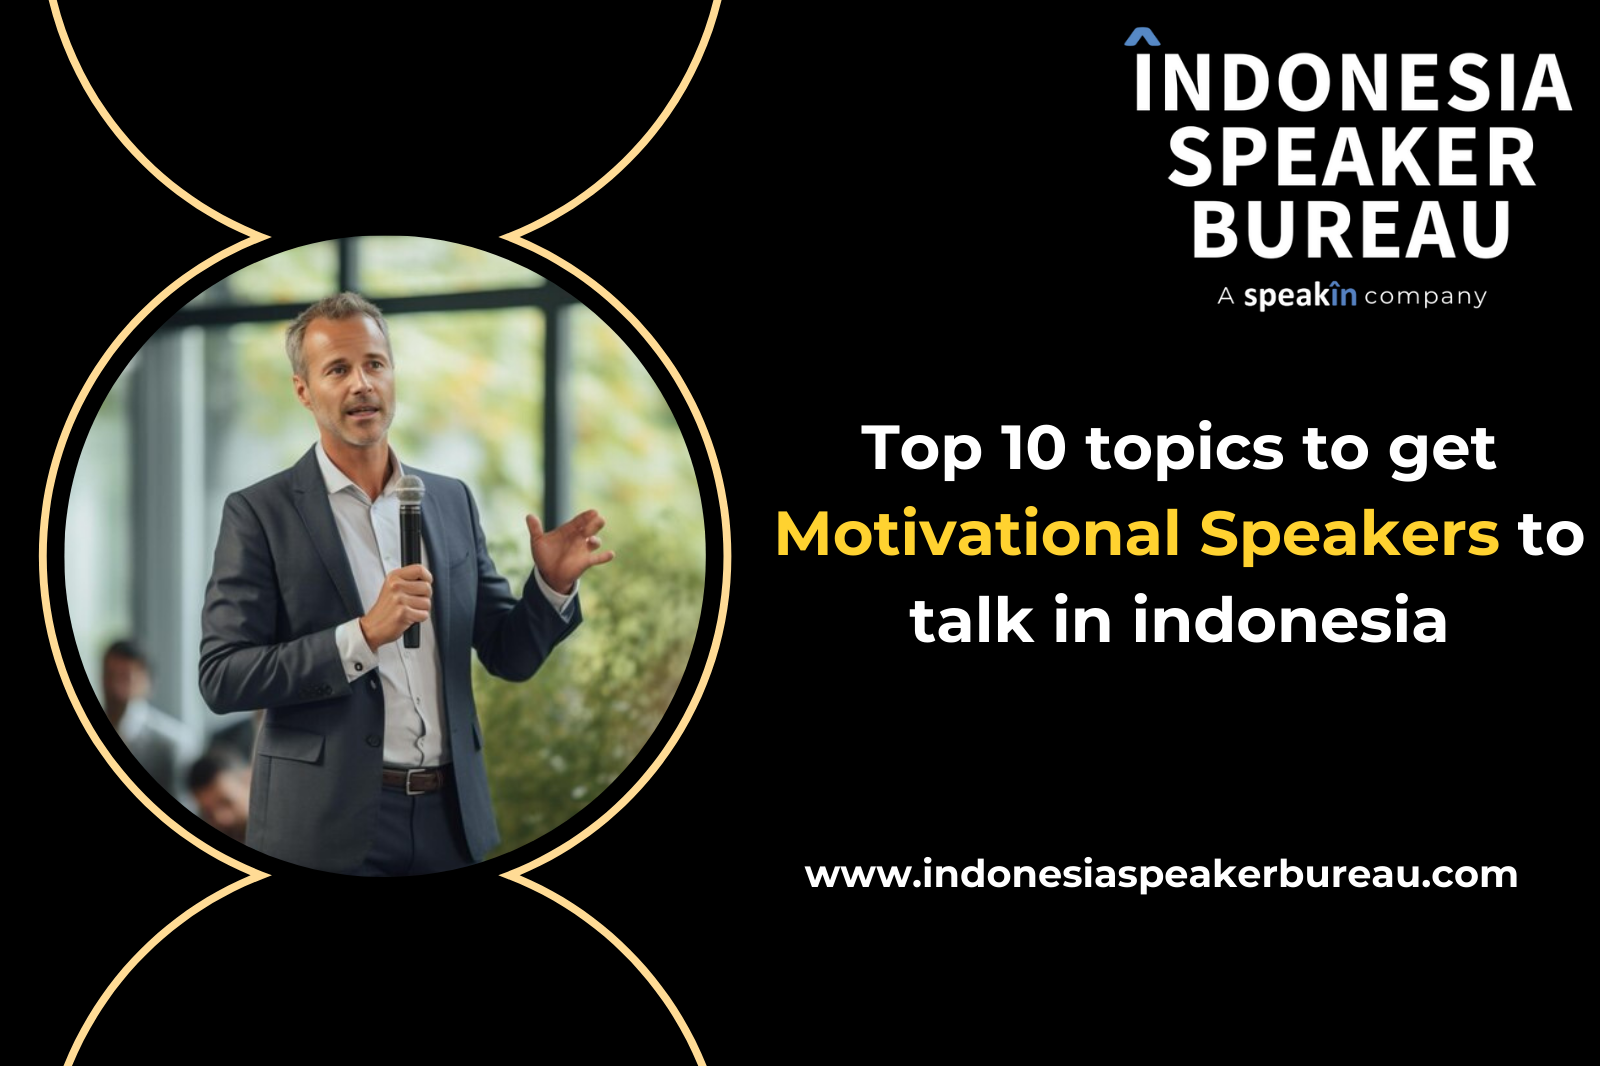 Top 10 Topics to Get Motivational Speakers to Talk in Indonesia